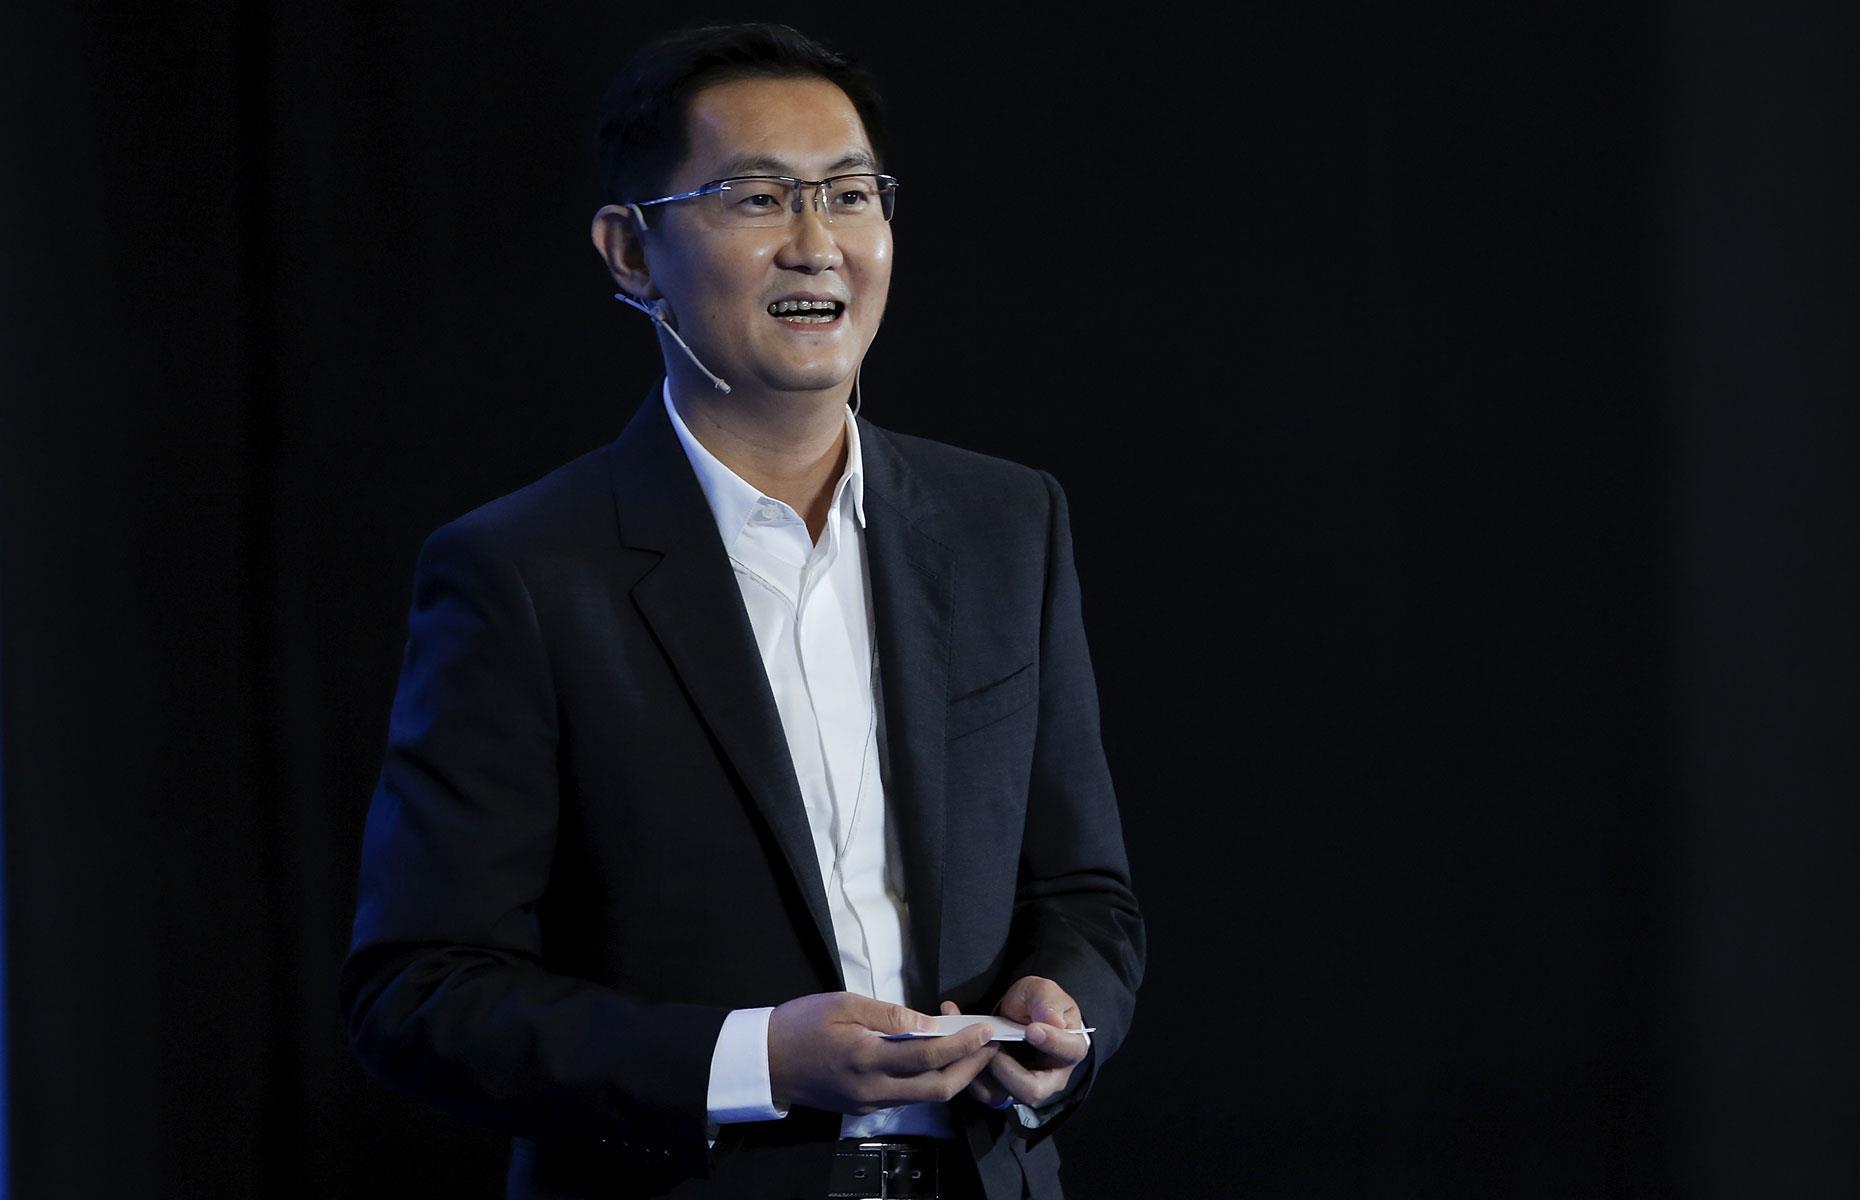 <p>Ma Huateng, aka Pony Ma, co-founded tech conglomerate Tencent in 1998 in the city of Shenzhen, China.</p>  <p>Tencent is the world's largest gaming company and one of the most prominent social media firms on the planet.</p>  <p>Unsurprisingly, Ma, who was instrumental in the company's success, has become very rich indeed. He is married to Wang Dan-ting, and the couple have a daughter called Manlin.</p>